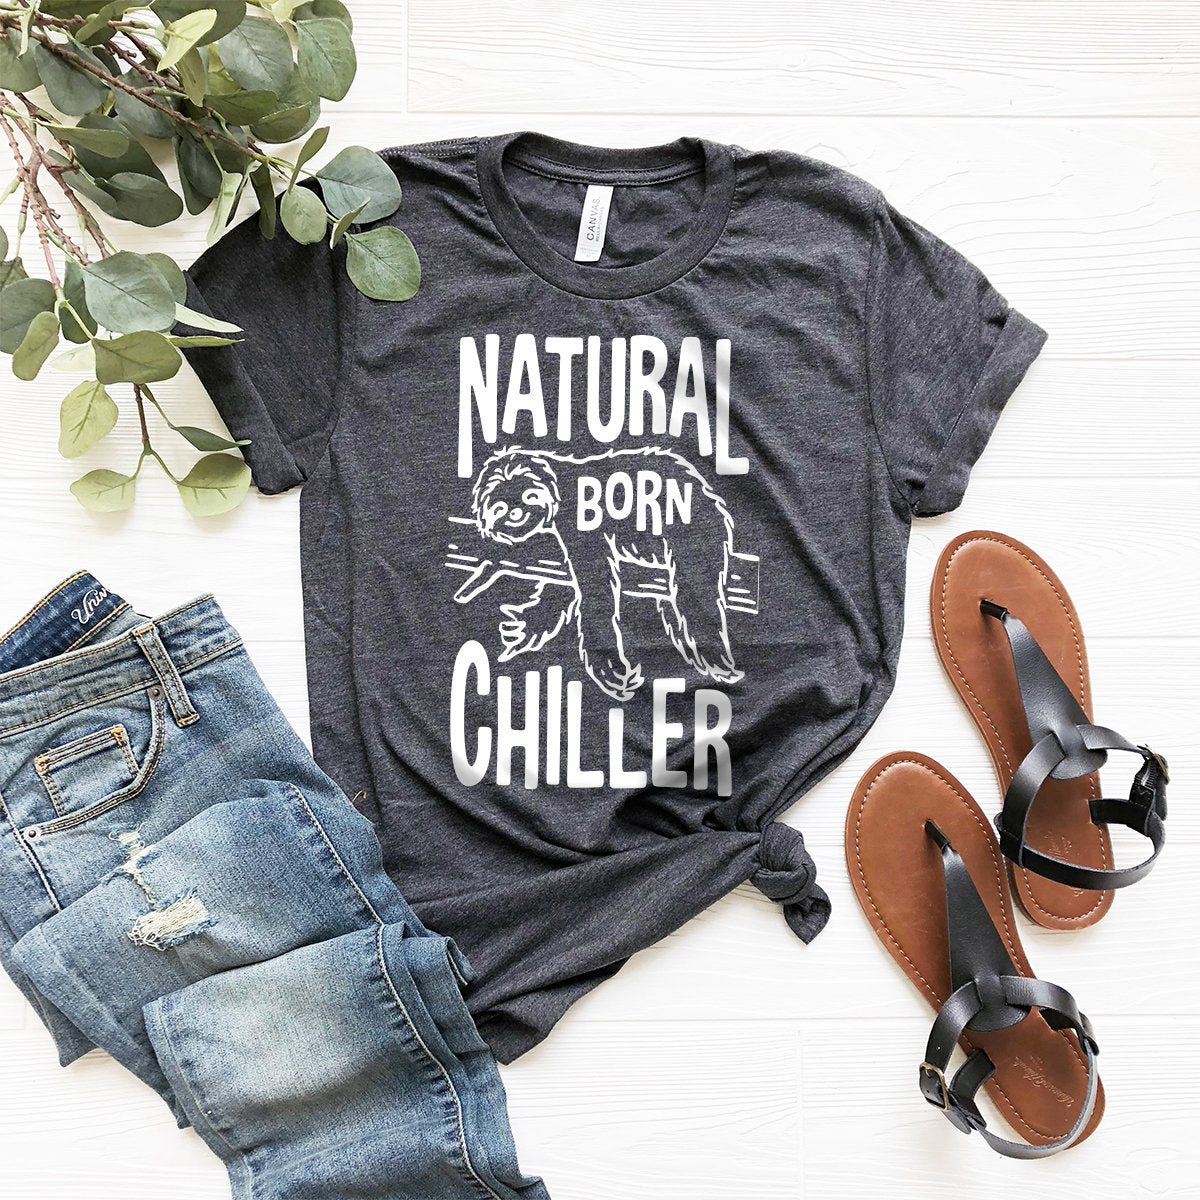 Natural Born Chiller T-Shirt, Sarcastic Shirt, Funny Sloth Shirt, Funny Chill Tshirt, Gift For Sloth Lover, Sloth Graphic Tee - Fastdeliverytees.com